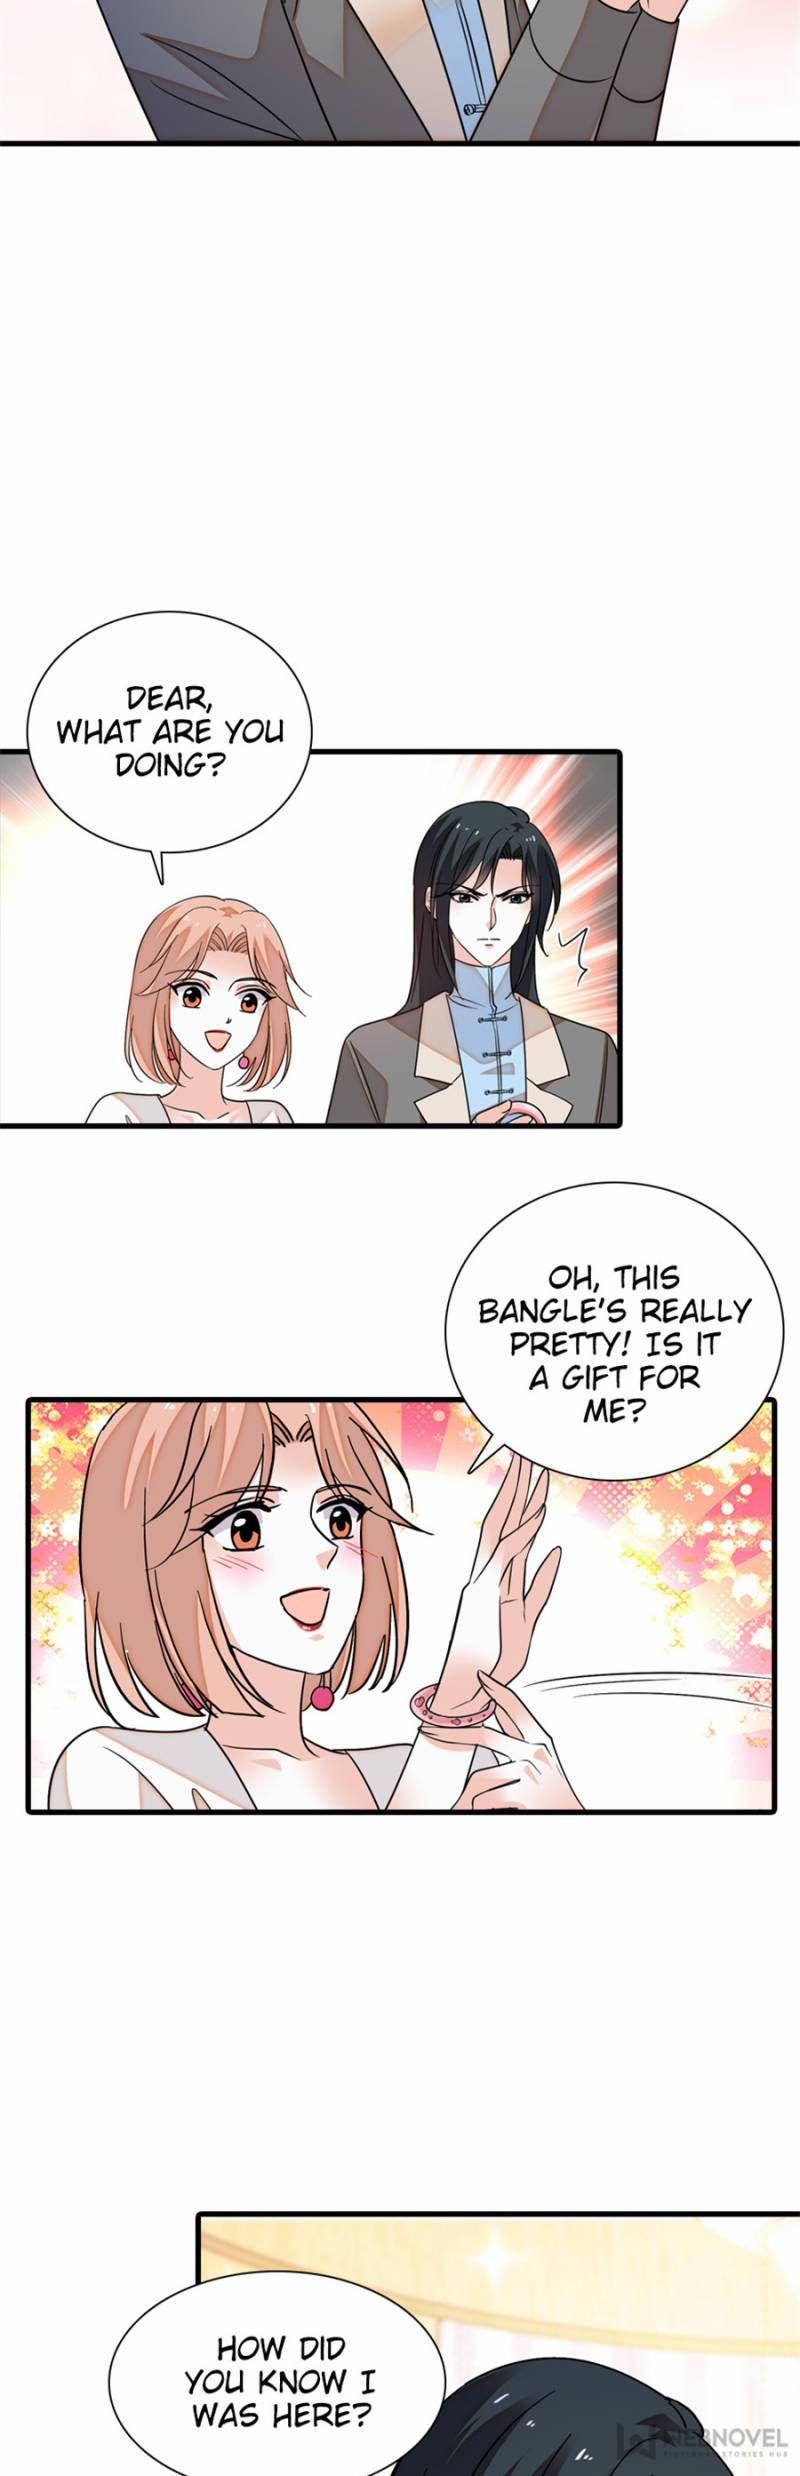 Sweetheart V5: The Boss Is Too Kind! Chapter 251 page 12